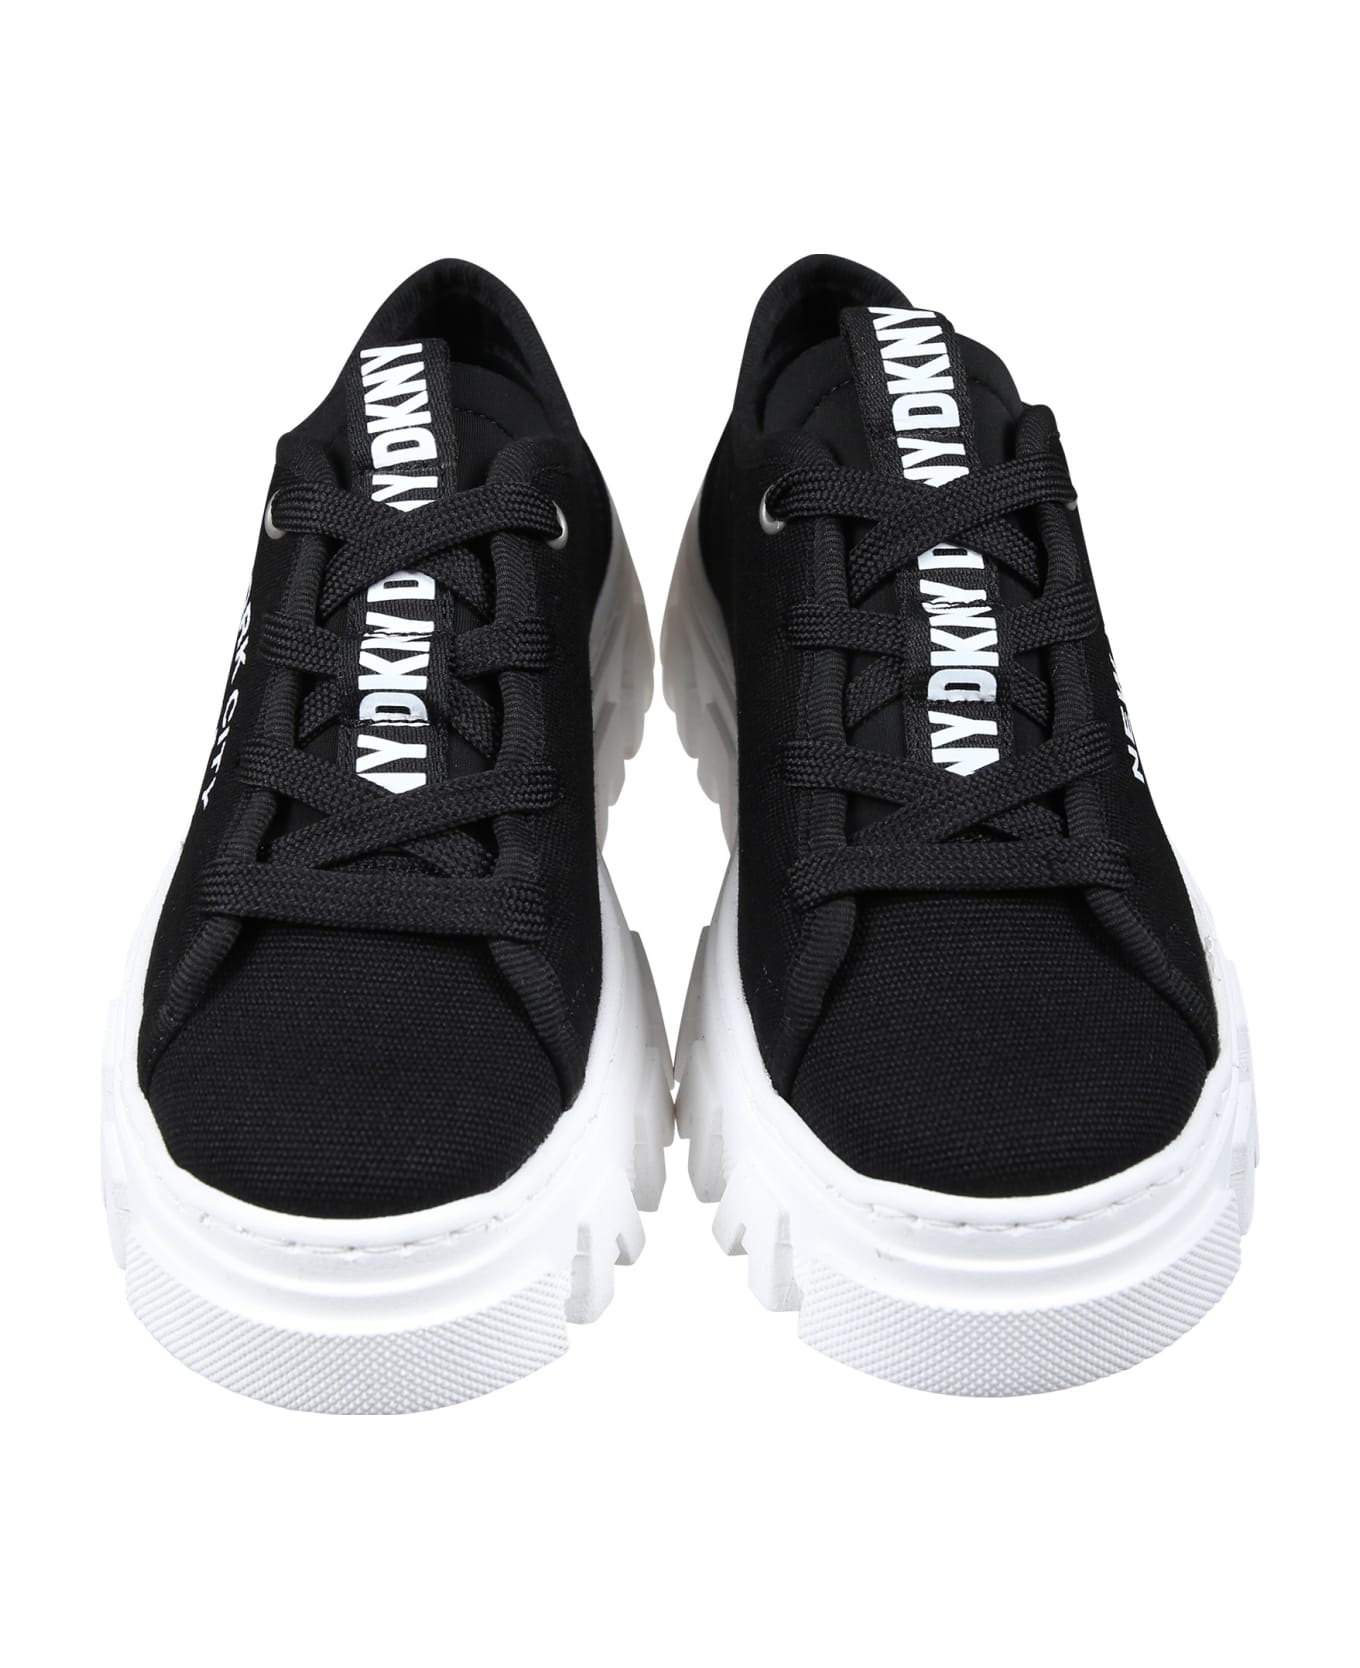 DKNY Black Sneakers For Girl With Logo - Black